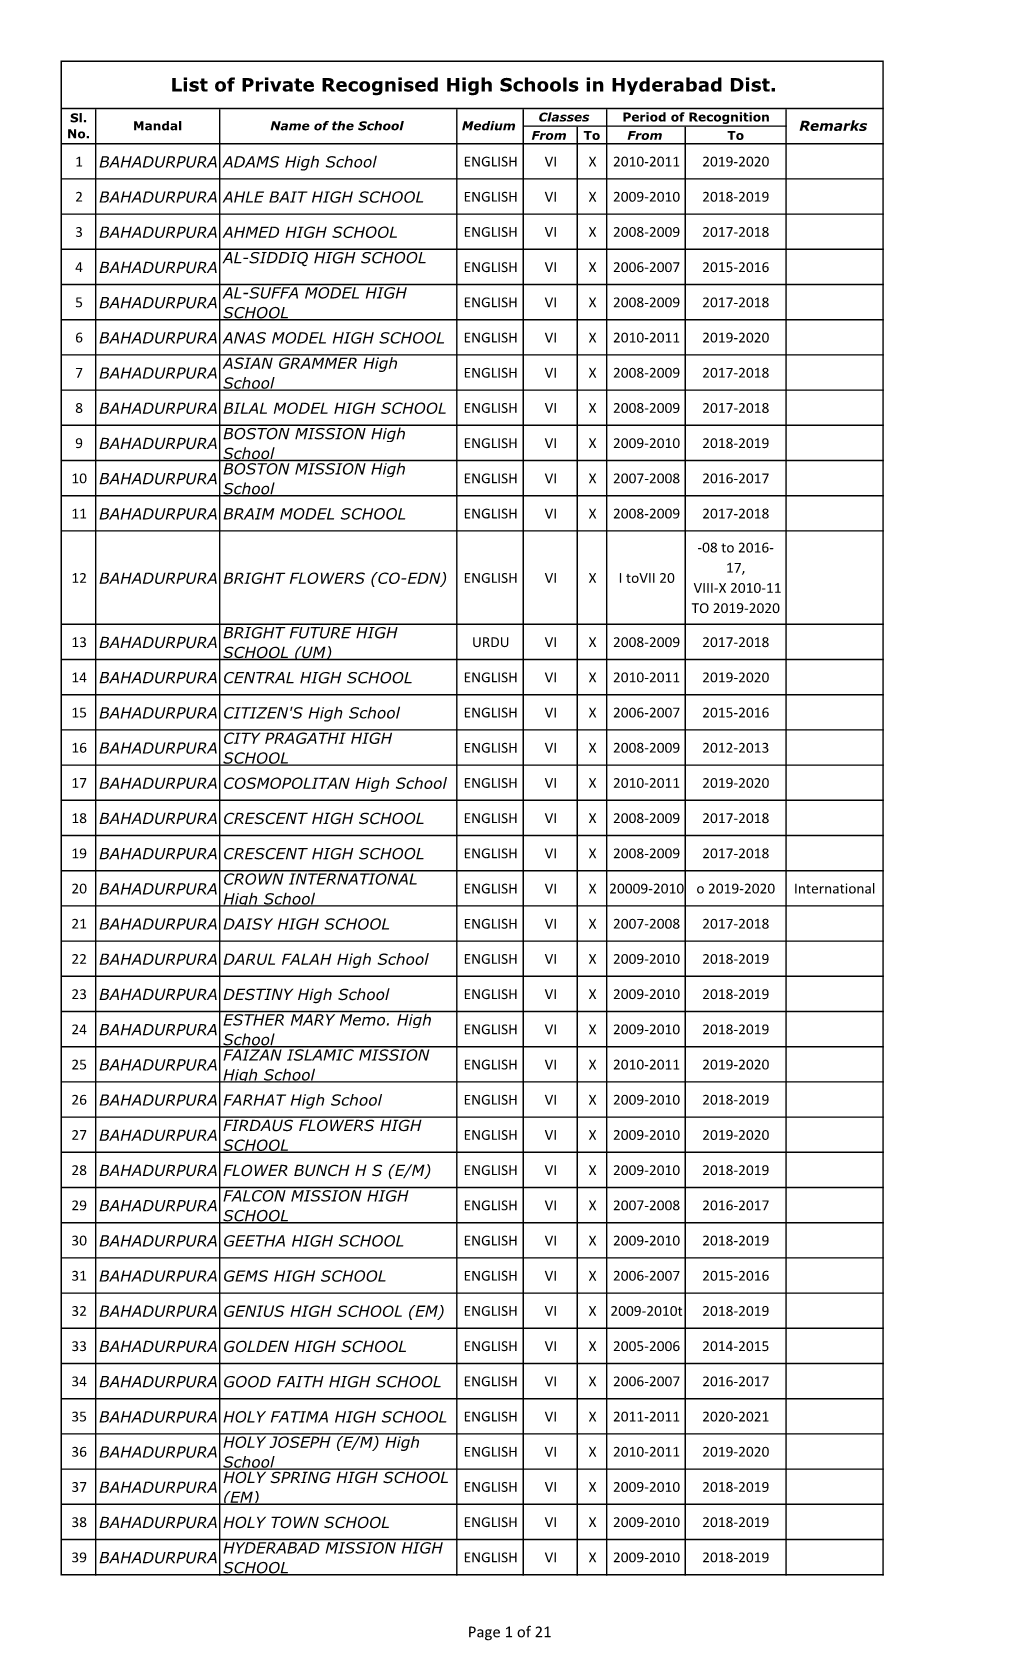 List of Private Recognised High Schools in Hyderabad Dist